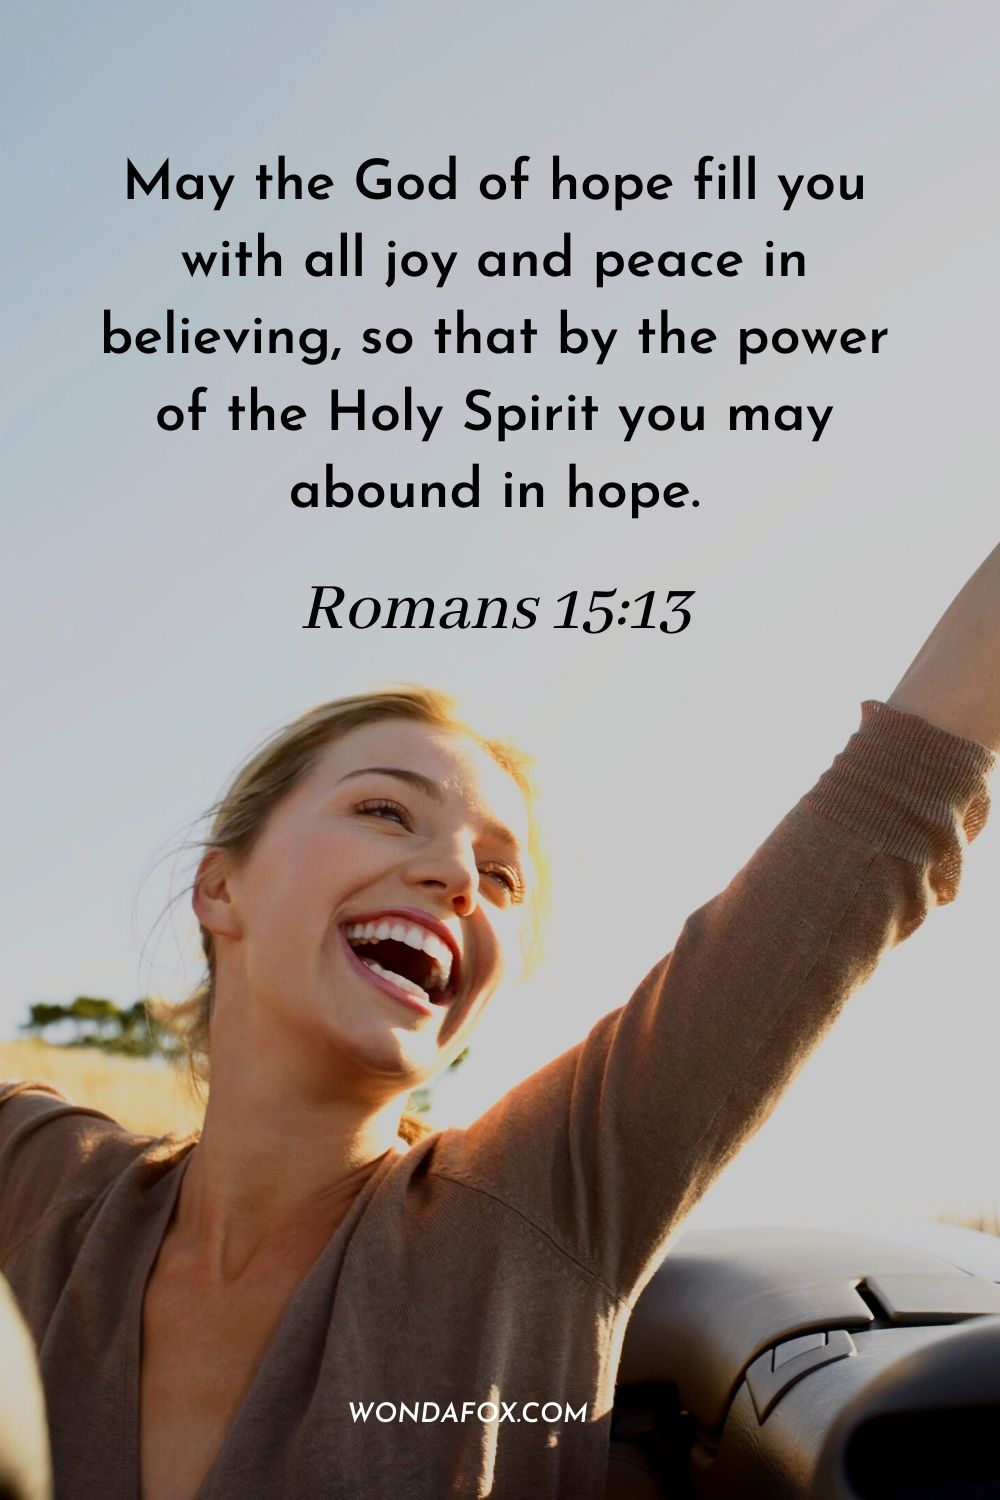 May the God of hope fill you with all joy and peace in believing, so that by the power of the Holy Spirit you may abound in hope. Romans 15:13